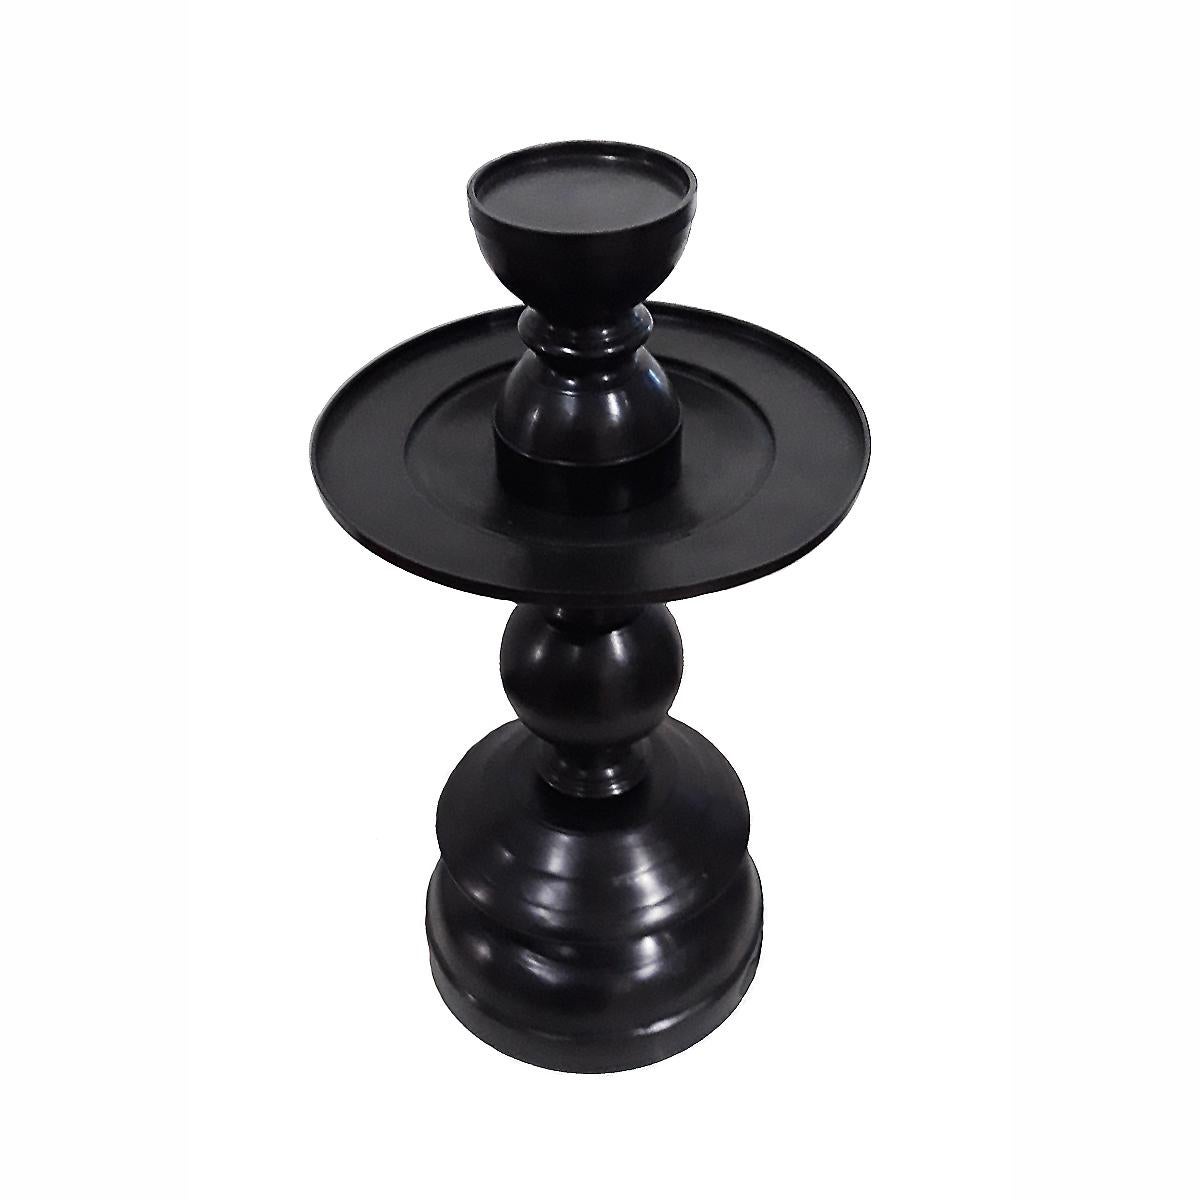 A medium-sized candlestick in forged bronze, black finish. Contemporary. The 9.5-inch diameter top plate is designed to hold large size candles, and includes a removable top that holds smaller size candles. 17.5 inches tall, with a 9-inch base. A